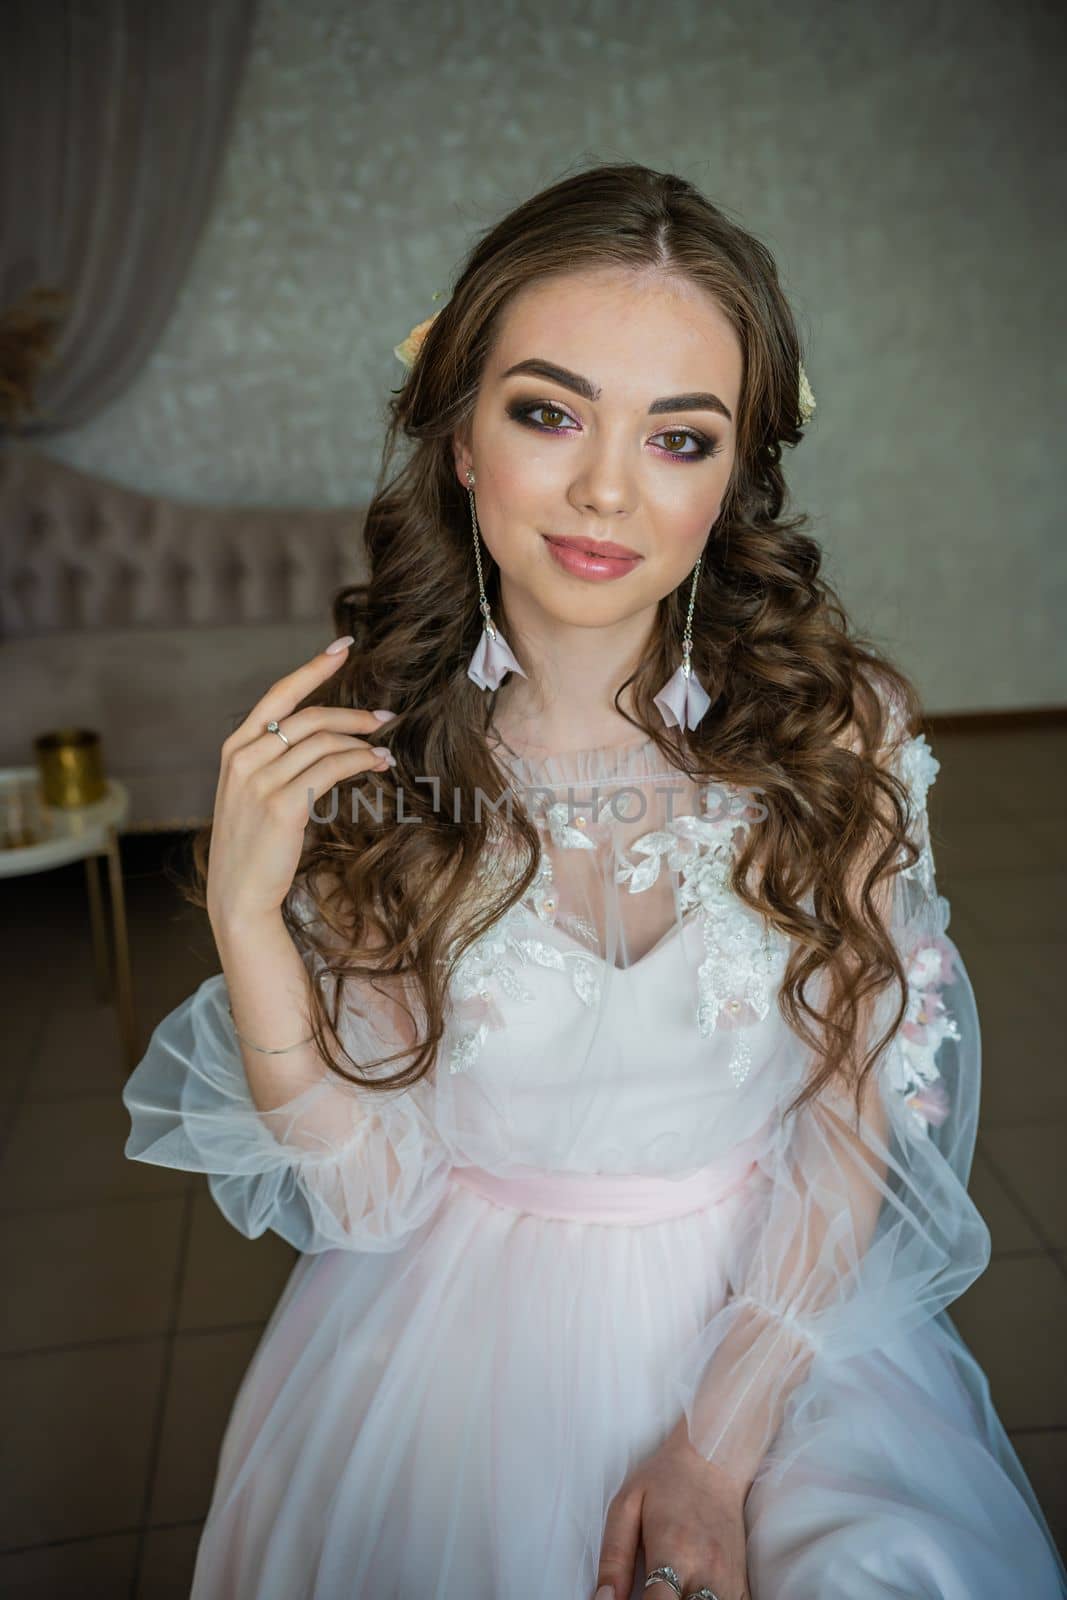 Beautiful festive make-up on a girl in a white dress